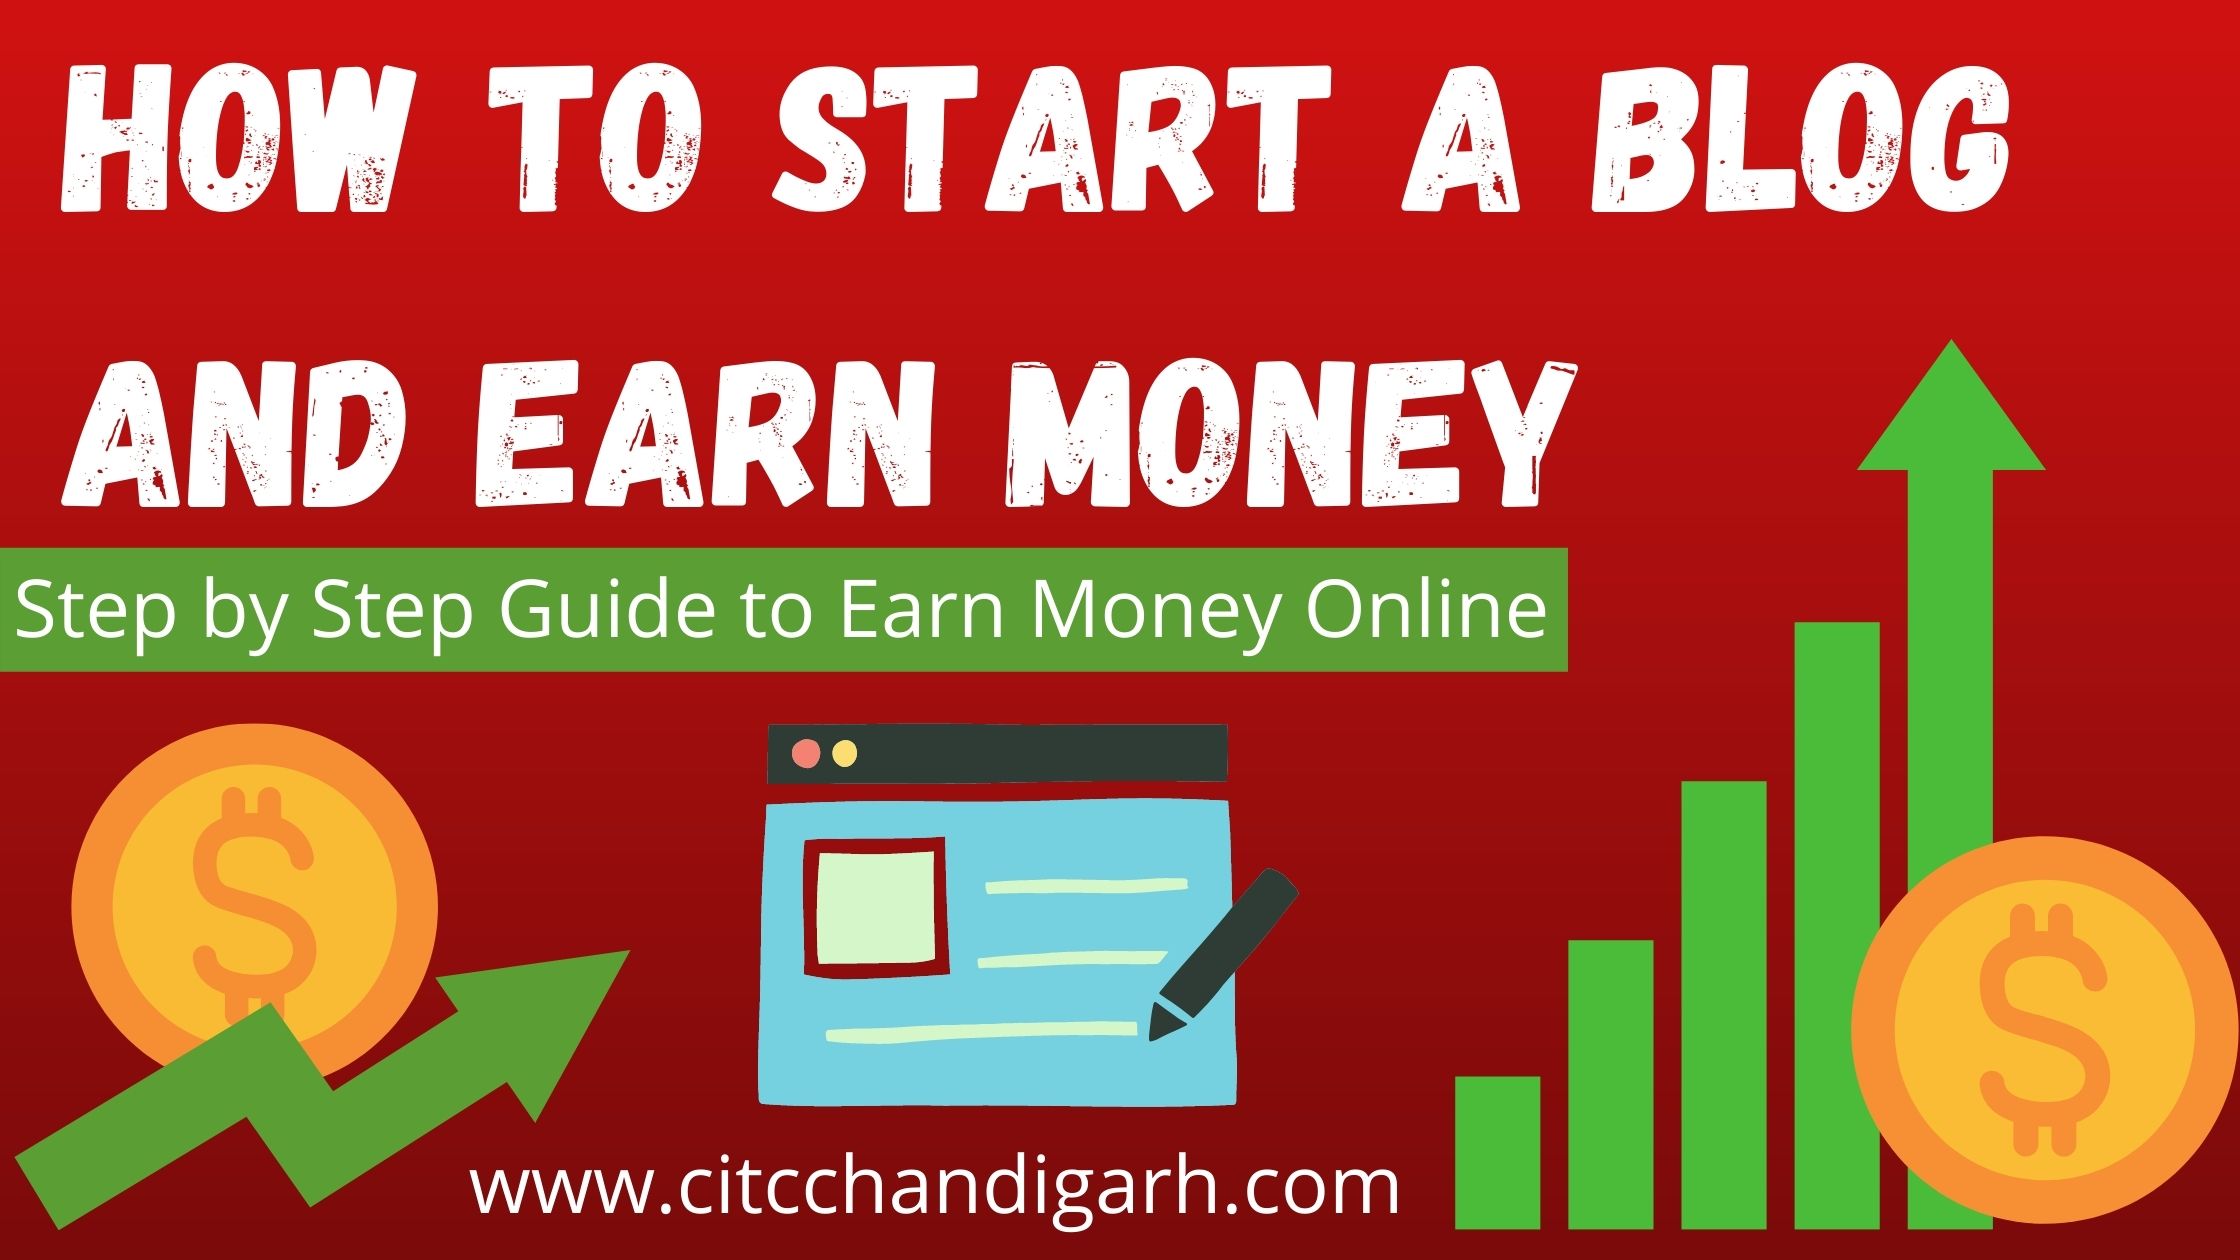 How to Start a Blog and Make Money Online